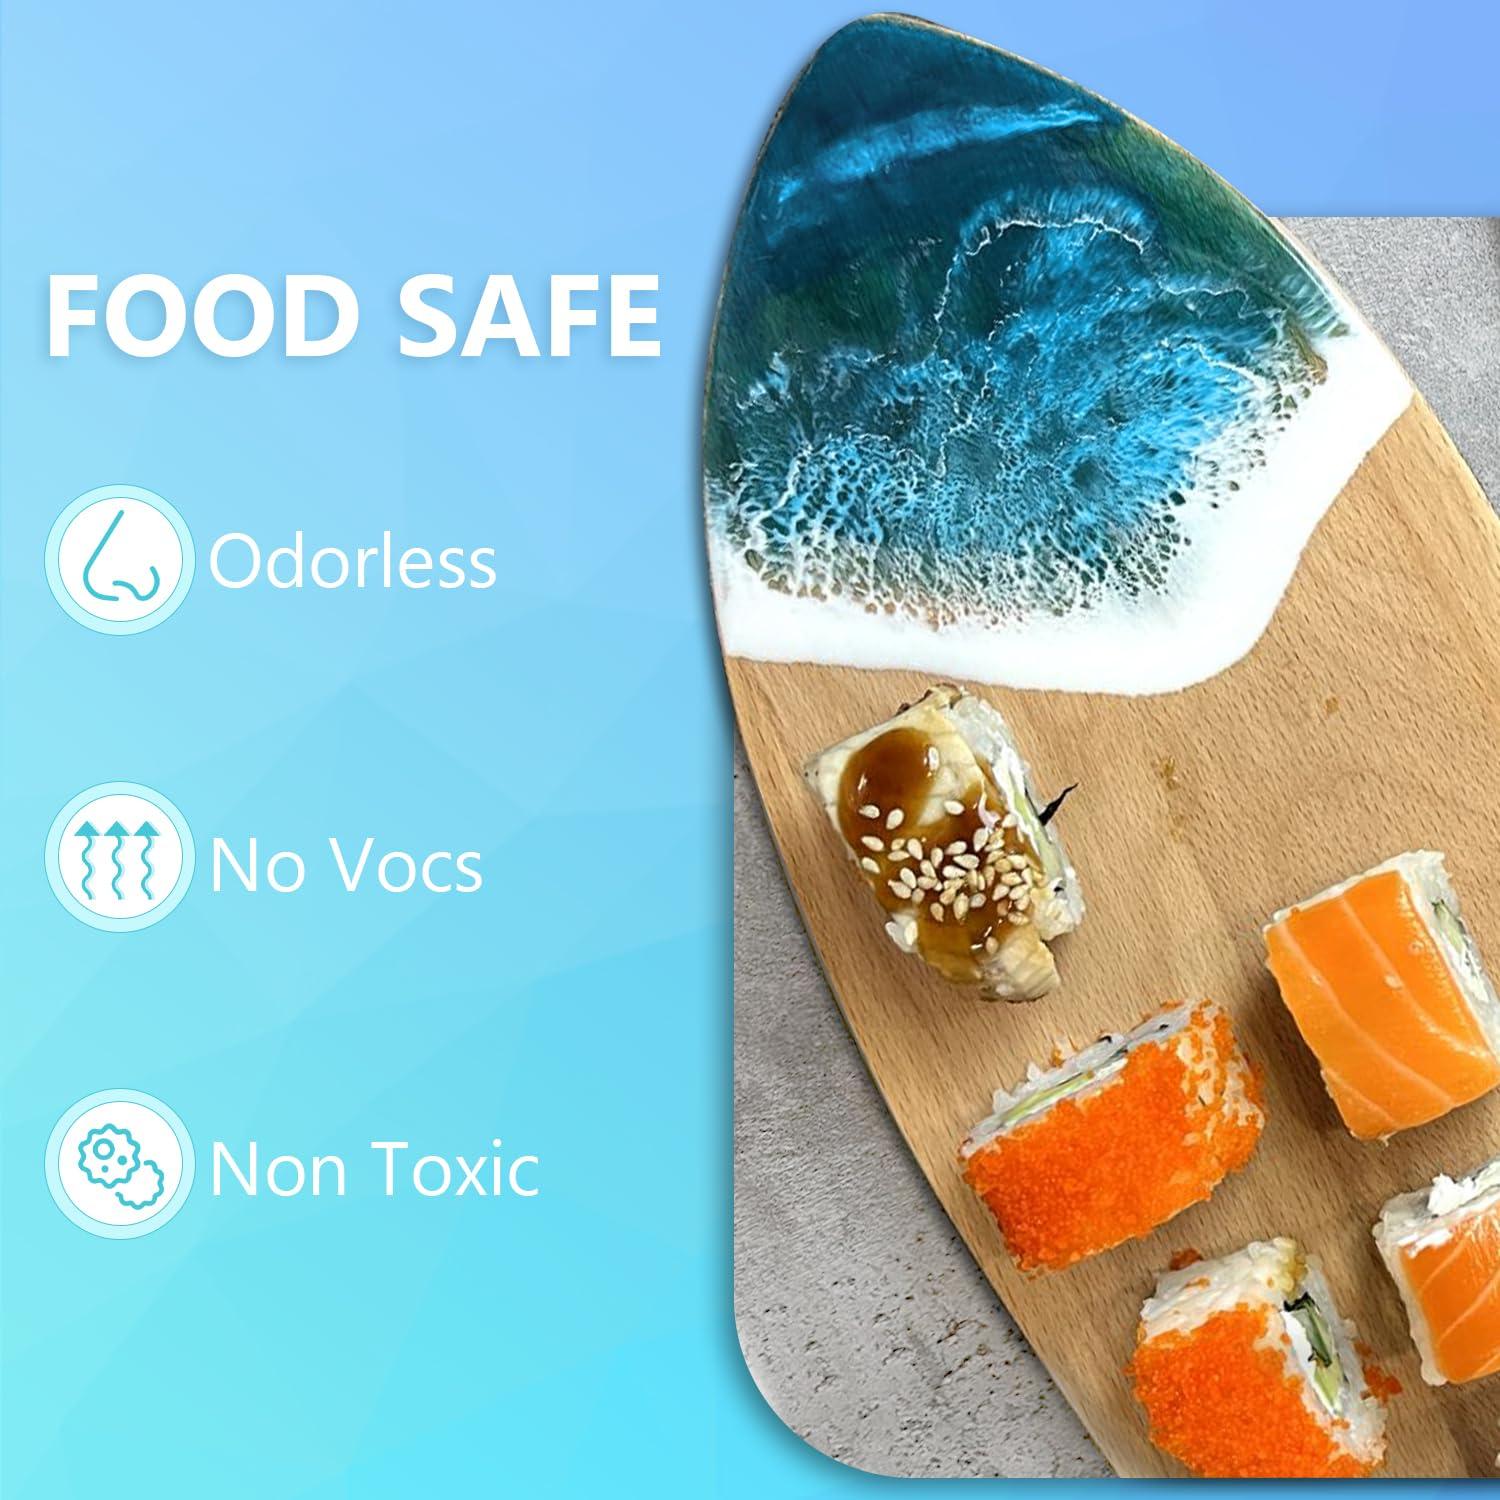 Is Epoxy Resin Food Safe for Cutting Boards, Tumblers or River